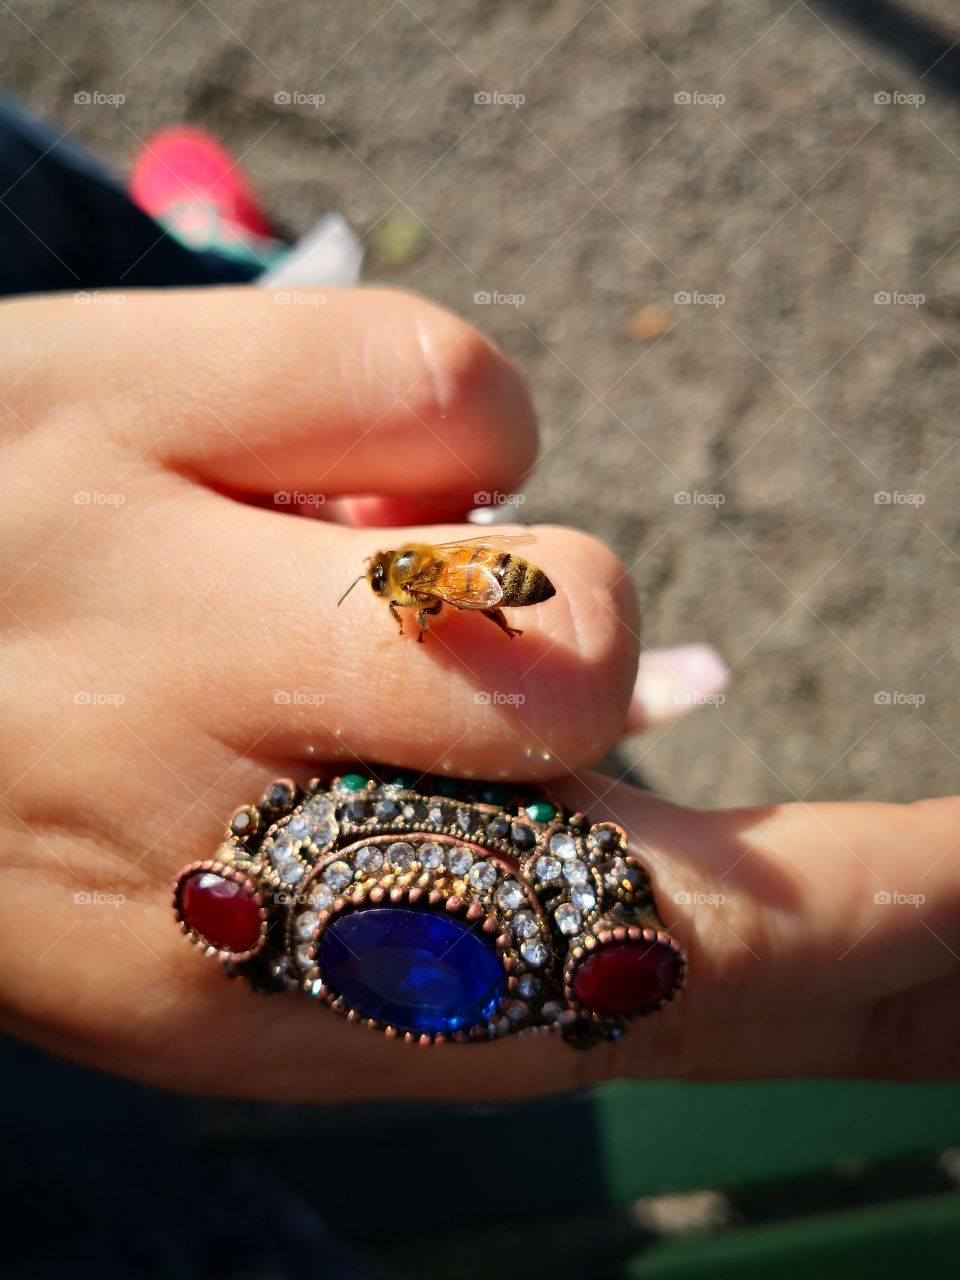 Bee on my finger.